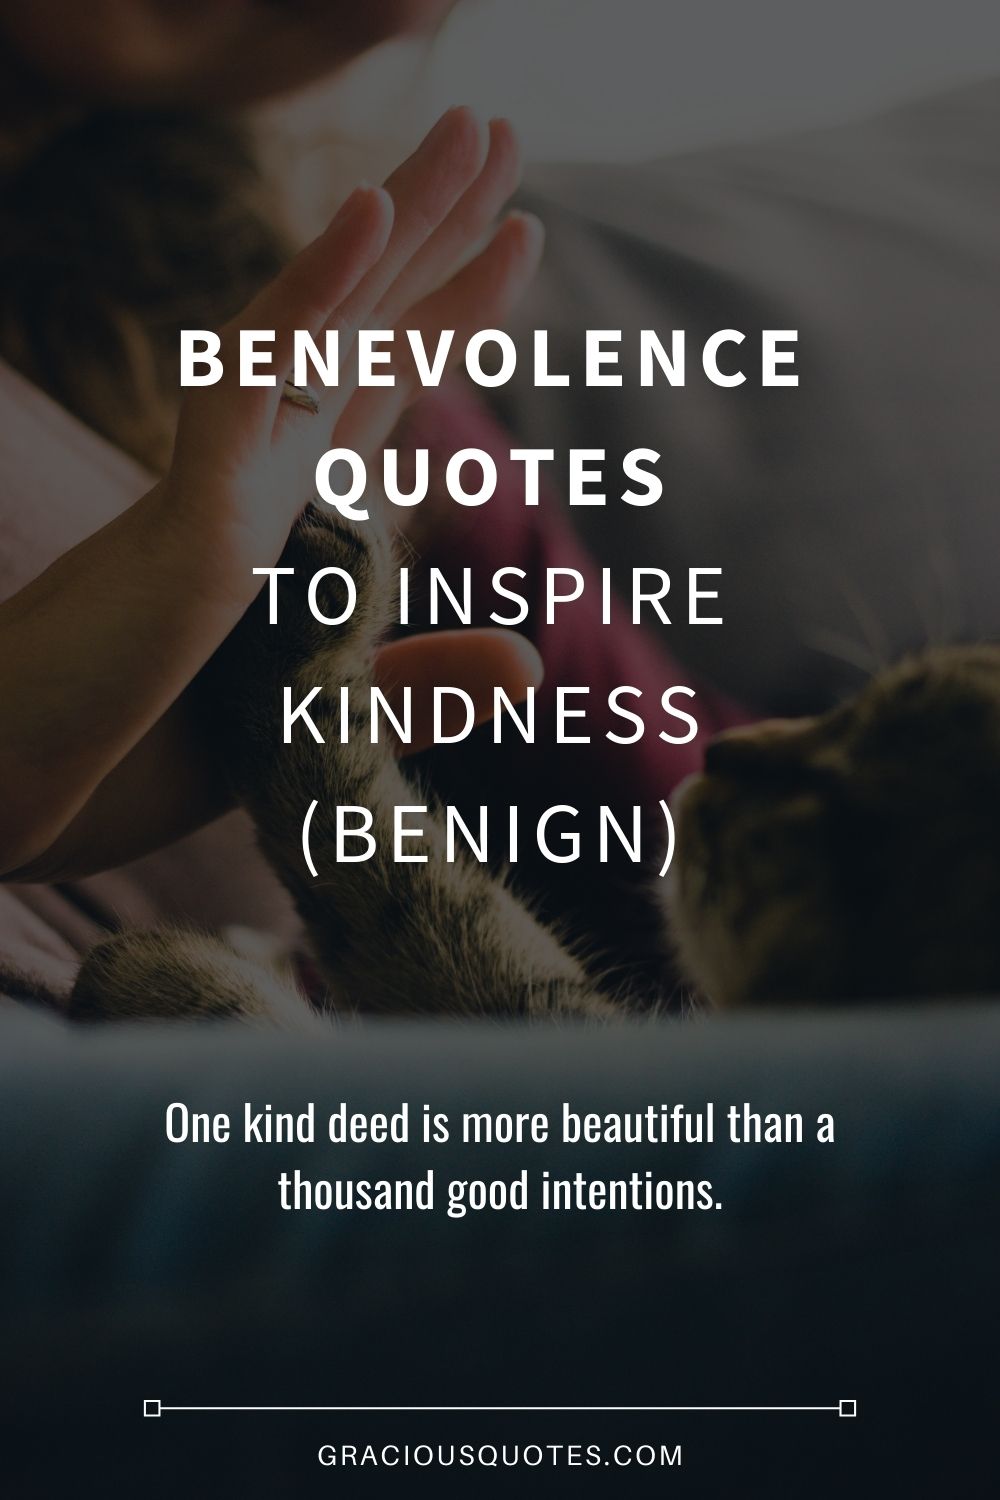 Benevolence Quotes to Inspire Kindness (BENIGN) - Gracious Quotes